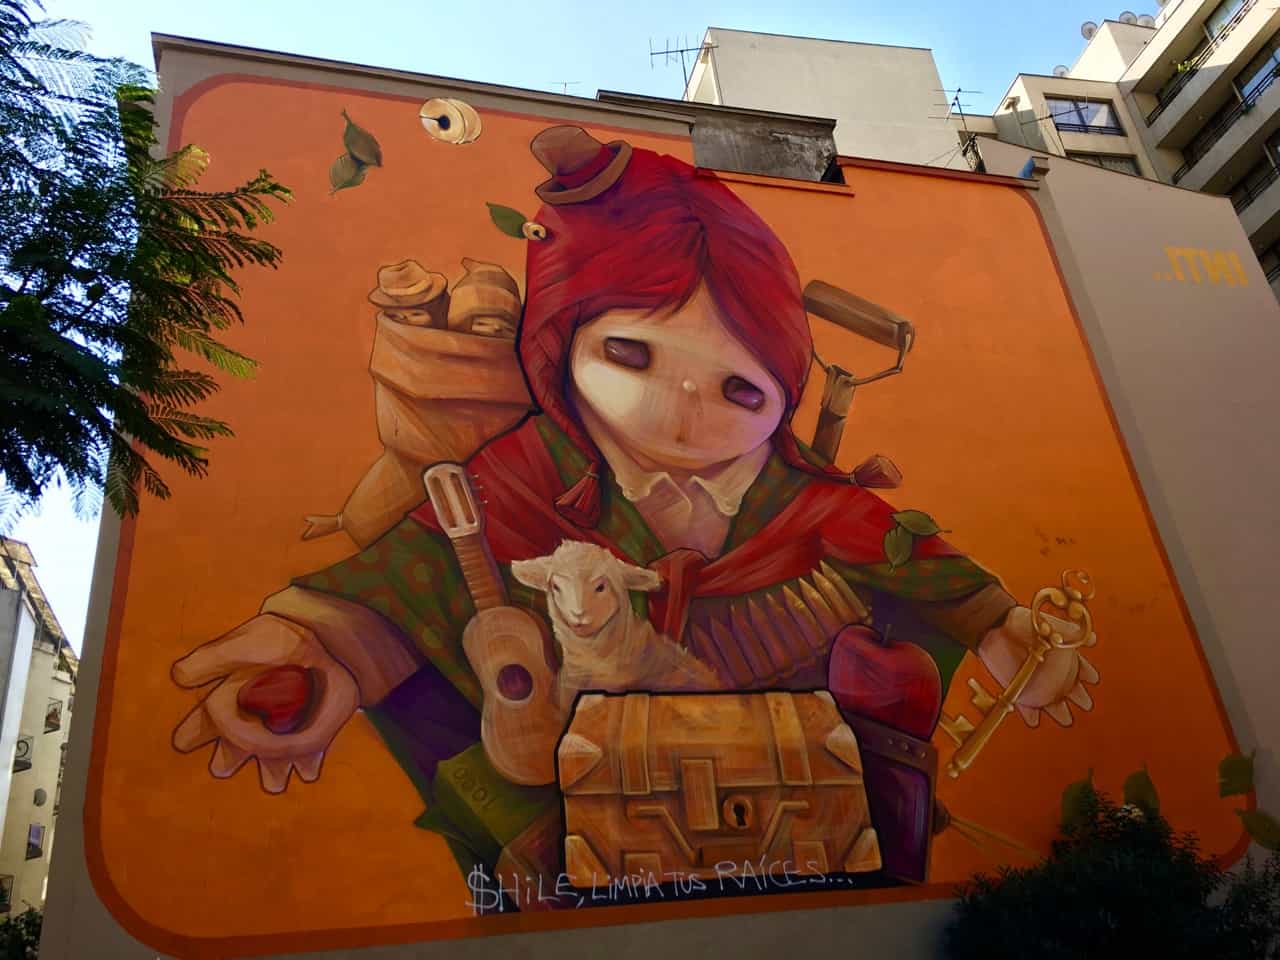 Free things to do in Santiago - Mural by Valparaiso artist INTI